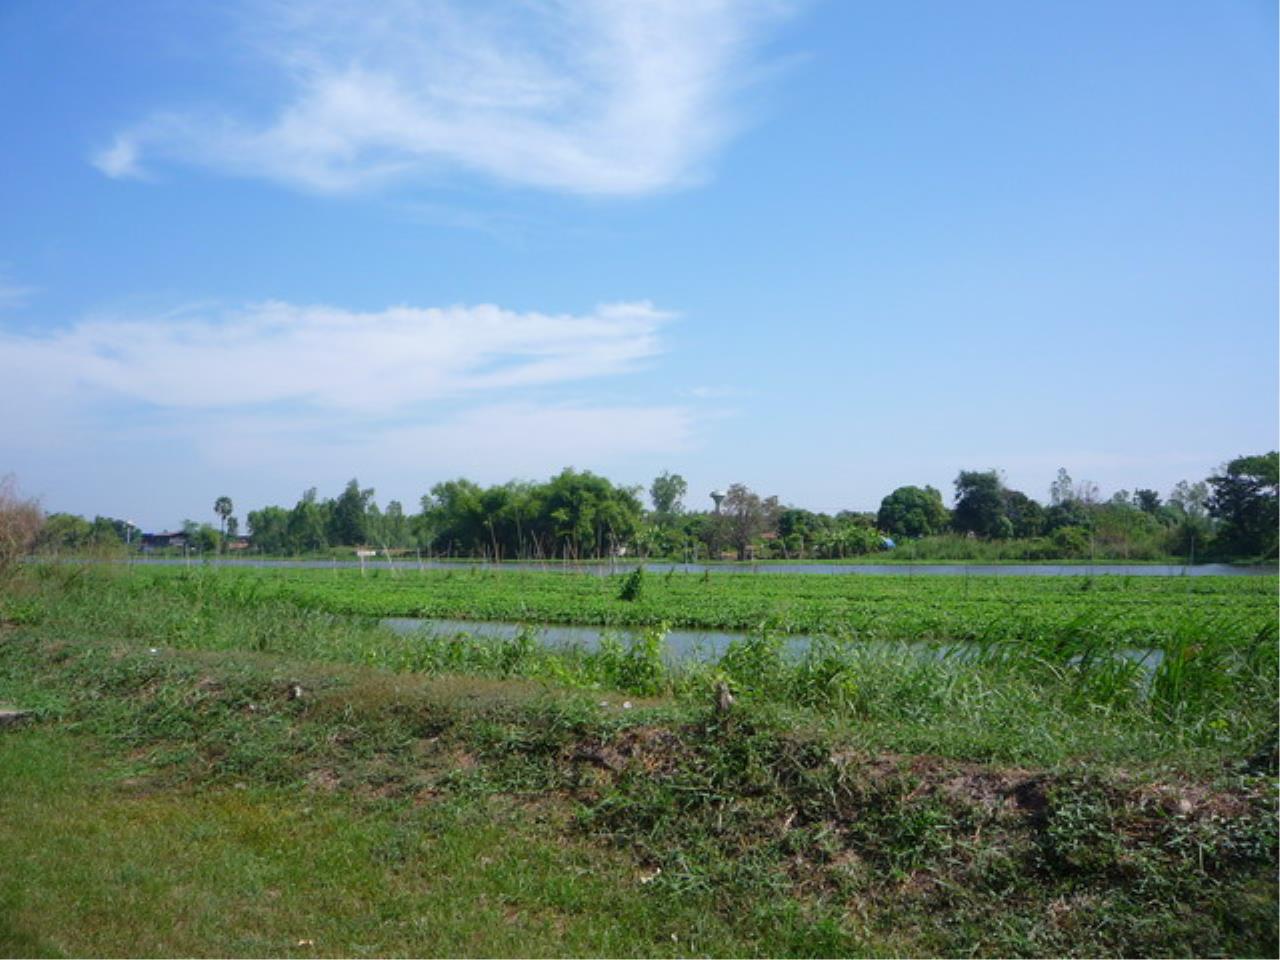 Forbest Properties Agency's 29565 - Banharn-Jamsai Road, Nakhon Pathom, Golf course for sale, area 513 acres 11